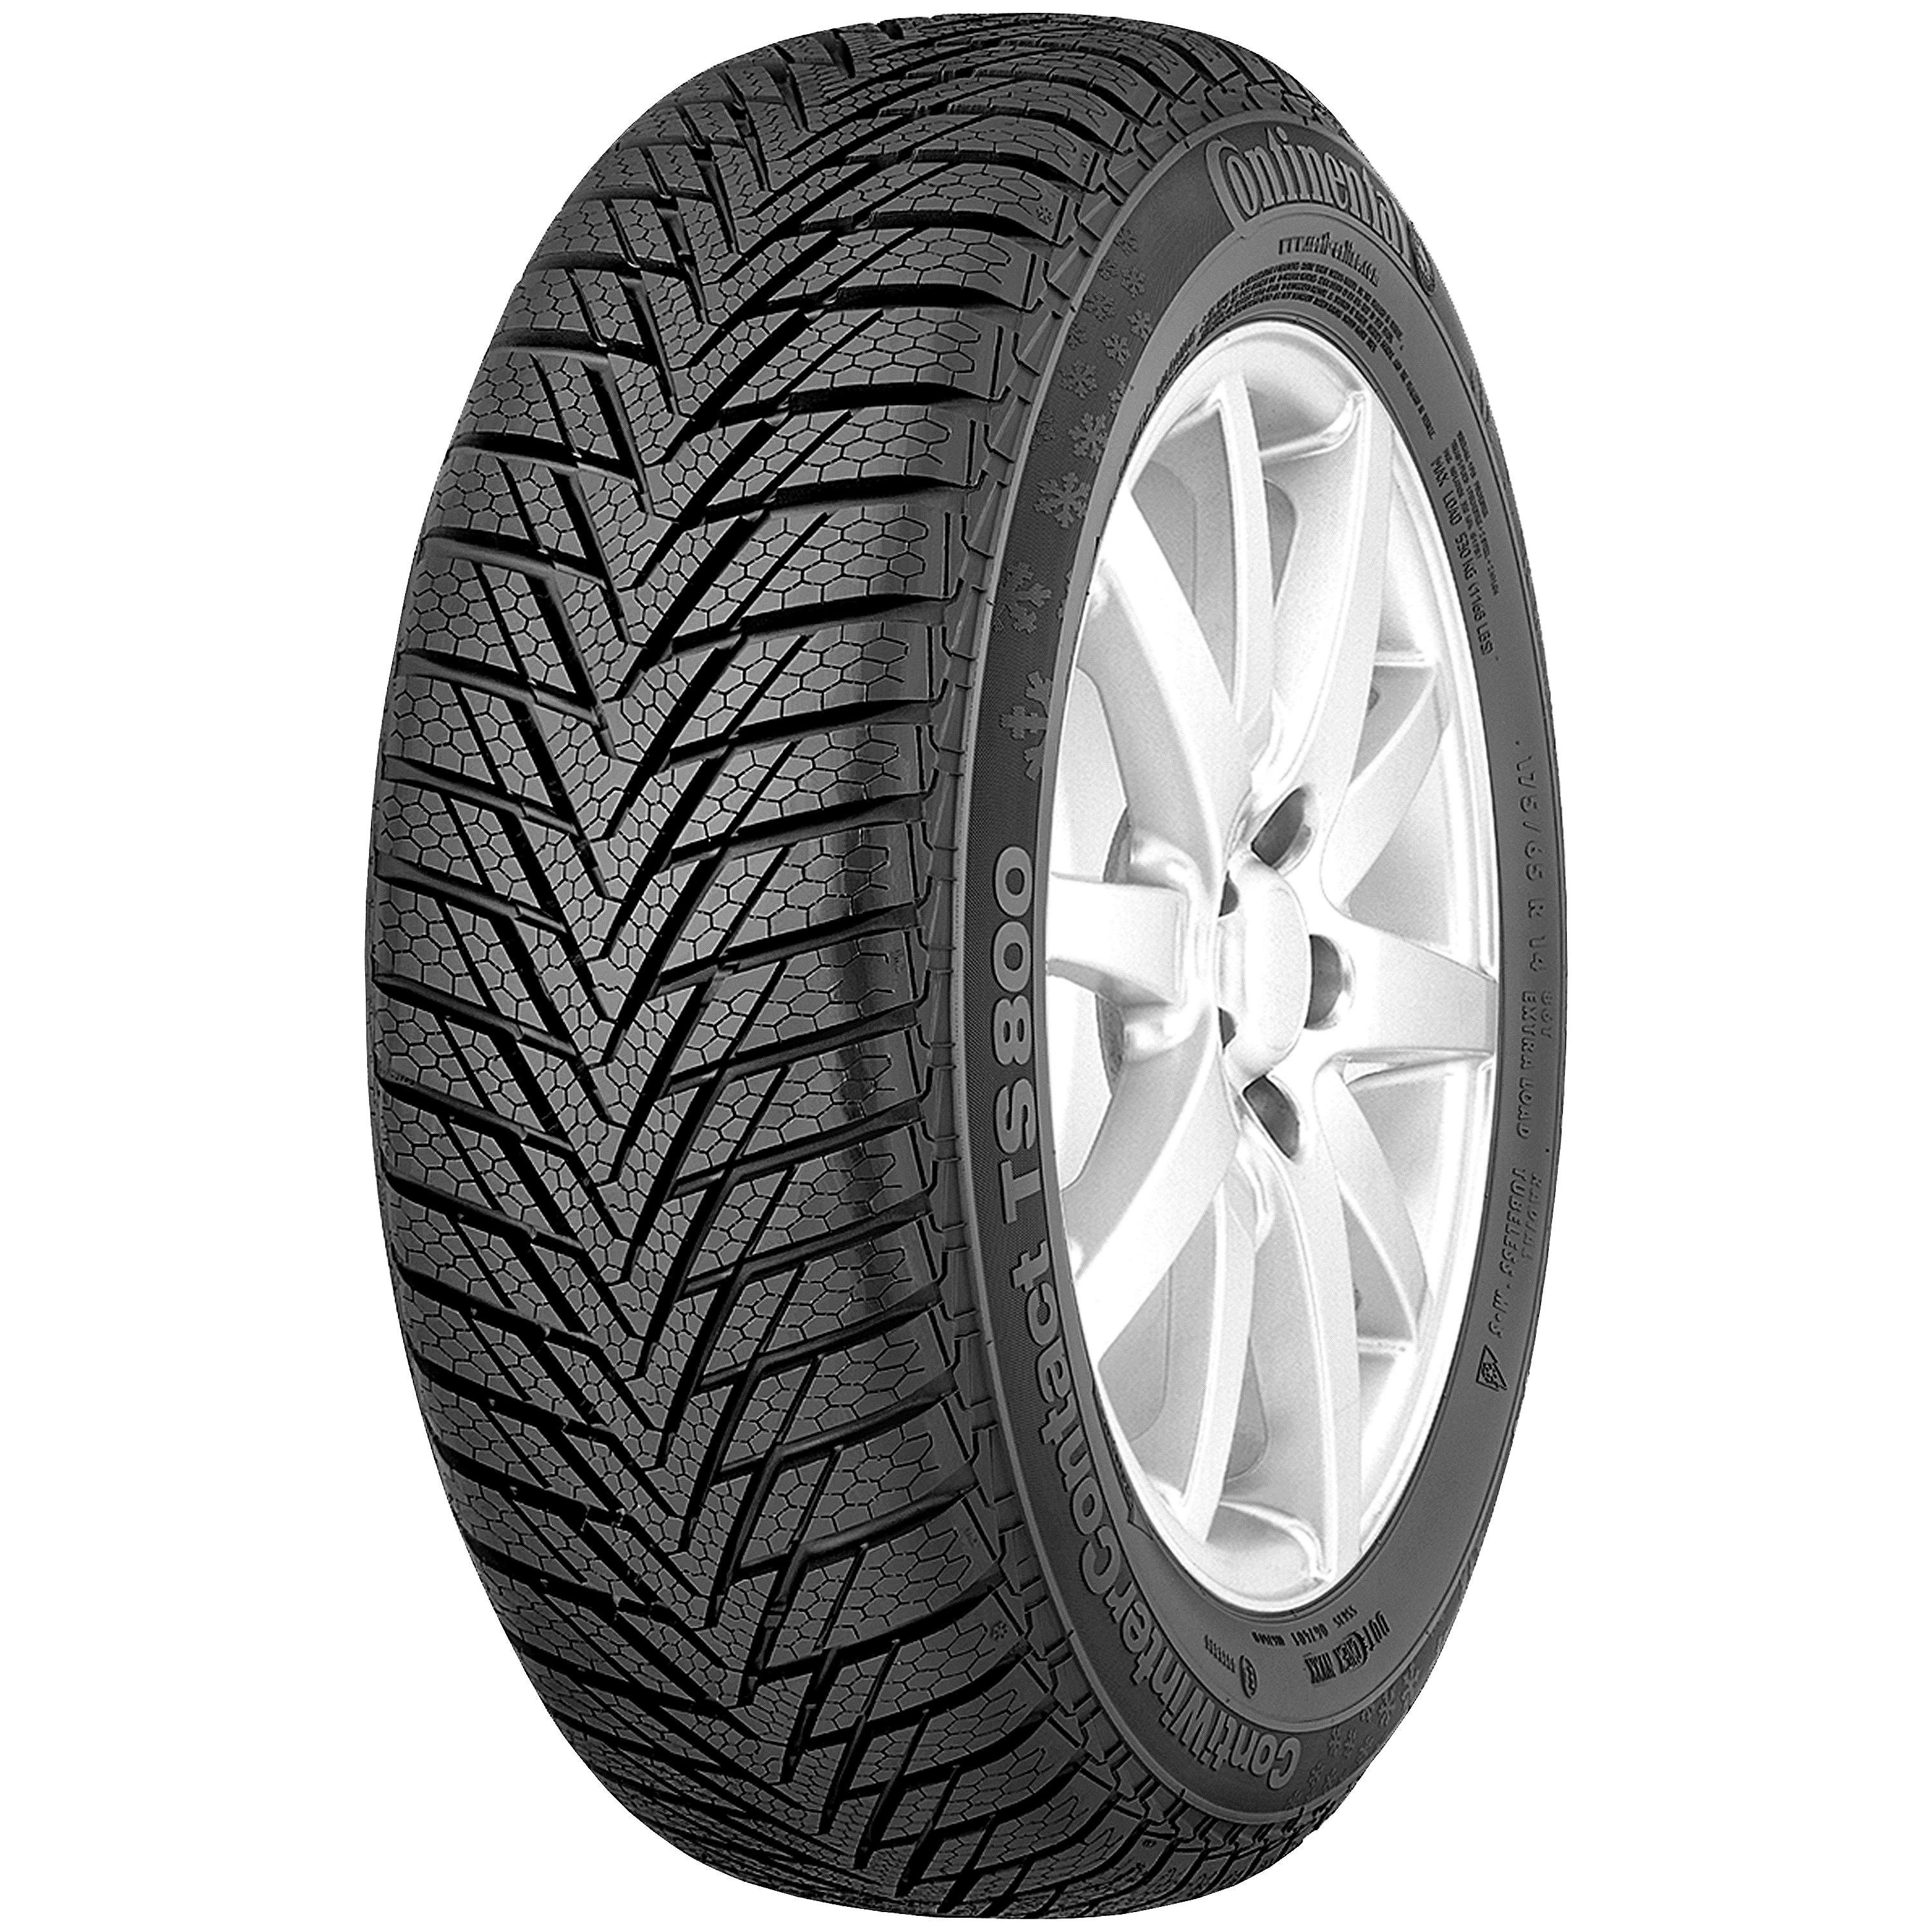 ContiWinterContact TS 800: Tailor-made category for winter tire the compact